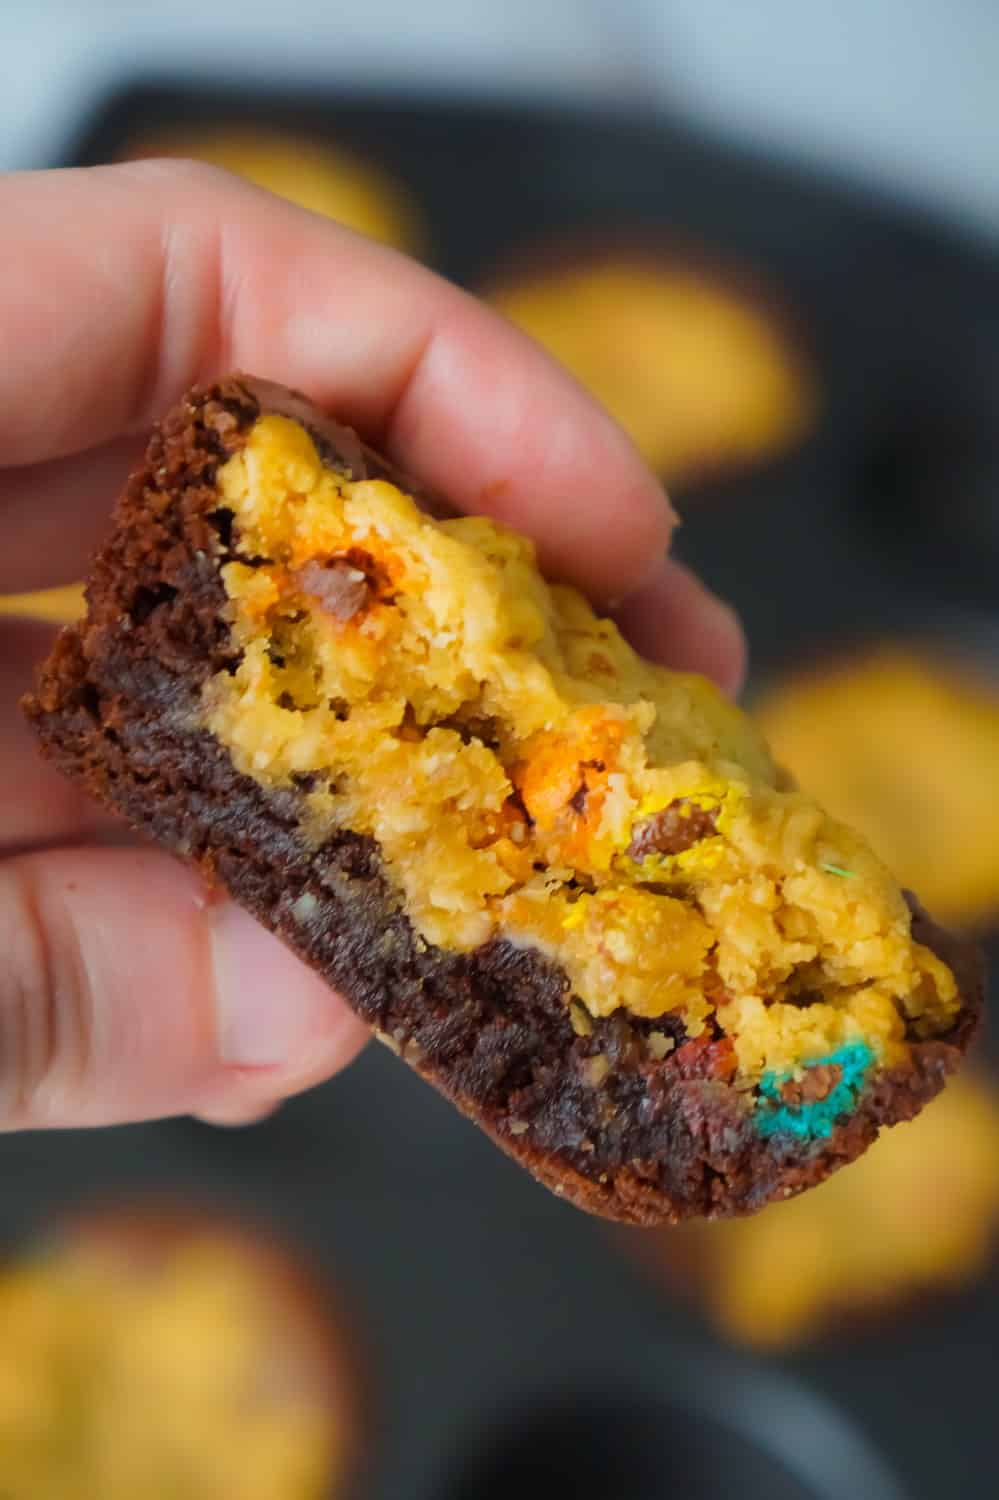 Monster Cookie Brownie Cups are an easy dessert recipe using boxed brownie mix and homemade oatmeal peanut butter cookie dough. These chewy brownie cups are loaded with mini M&Ms.